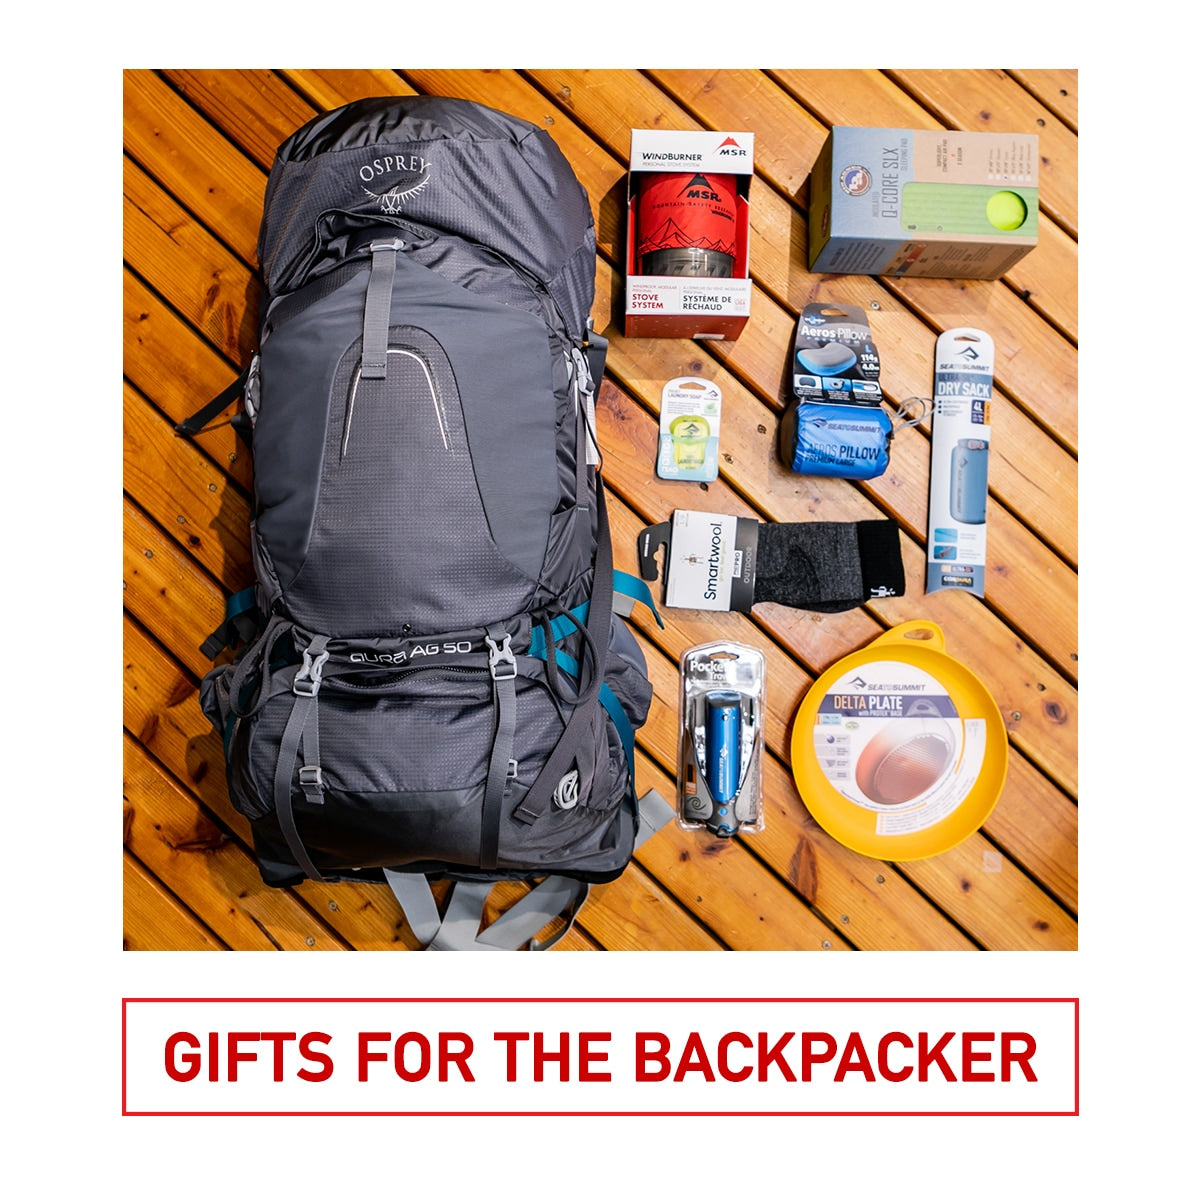 Gifts for the Backpacker